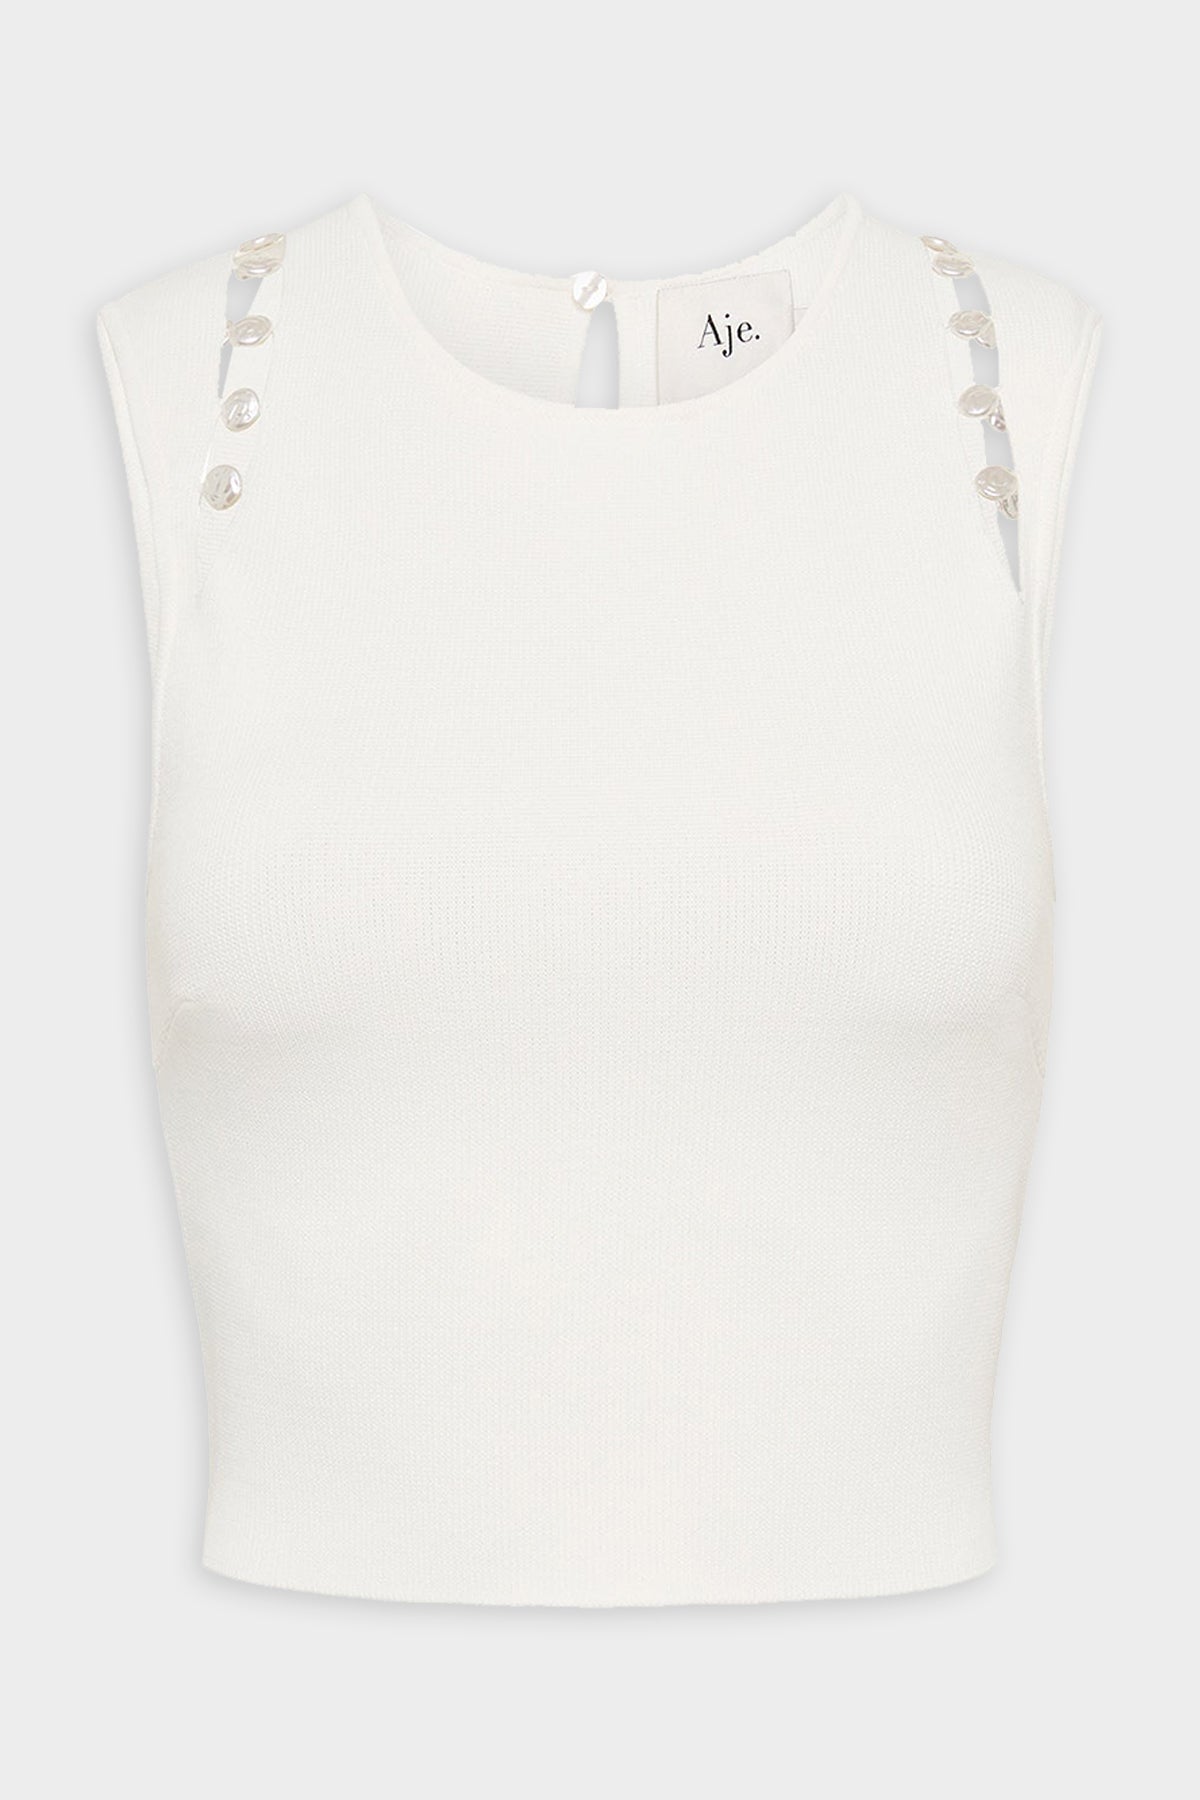 Analemma Pearl Knit Top in Ivory - shop-olivia.com